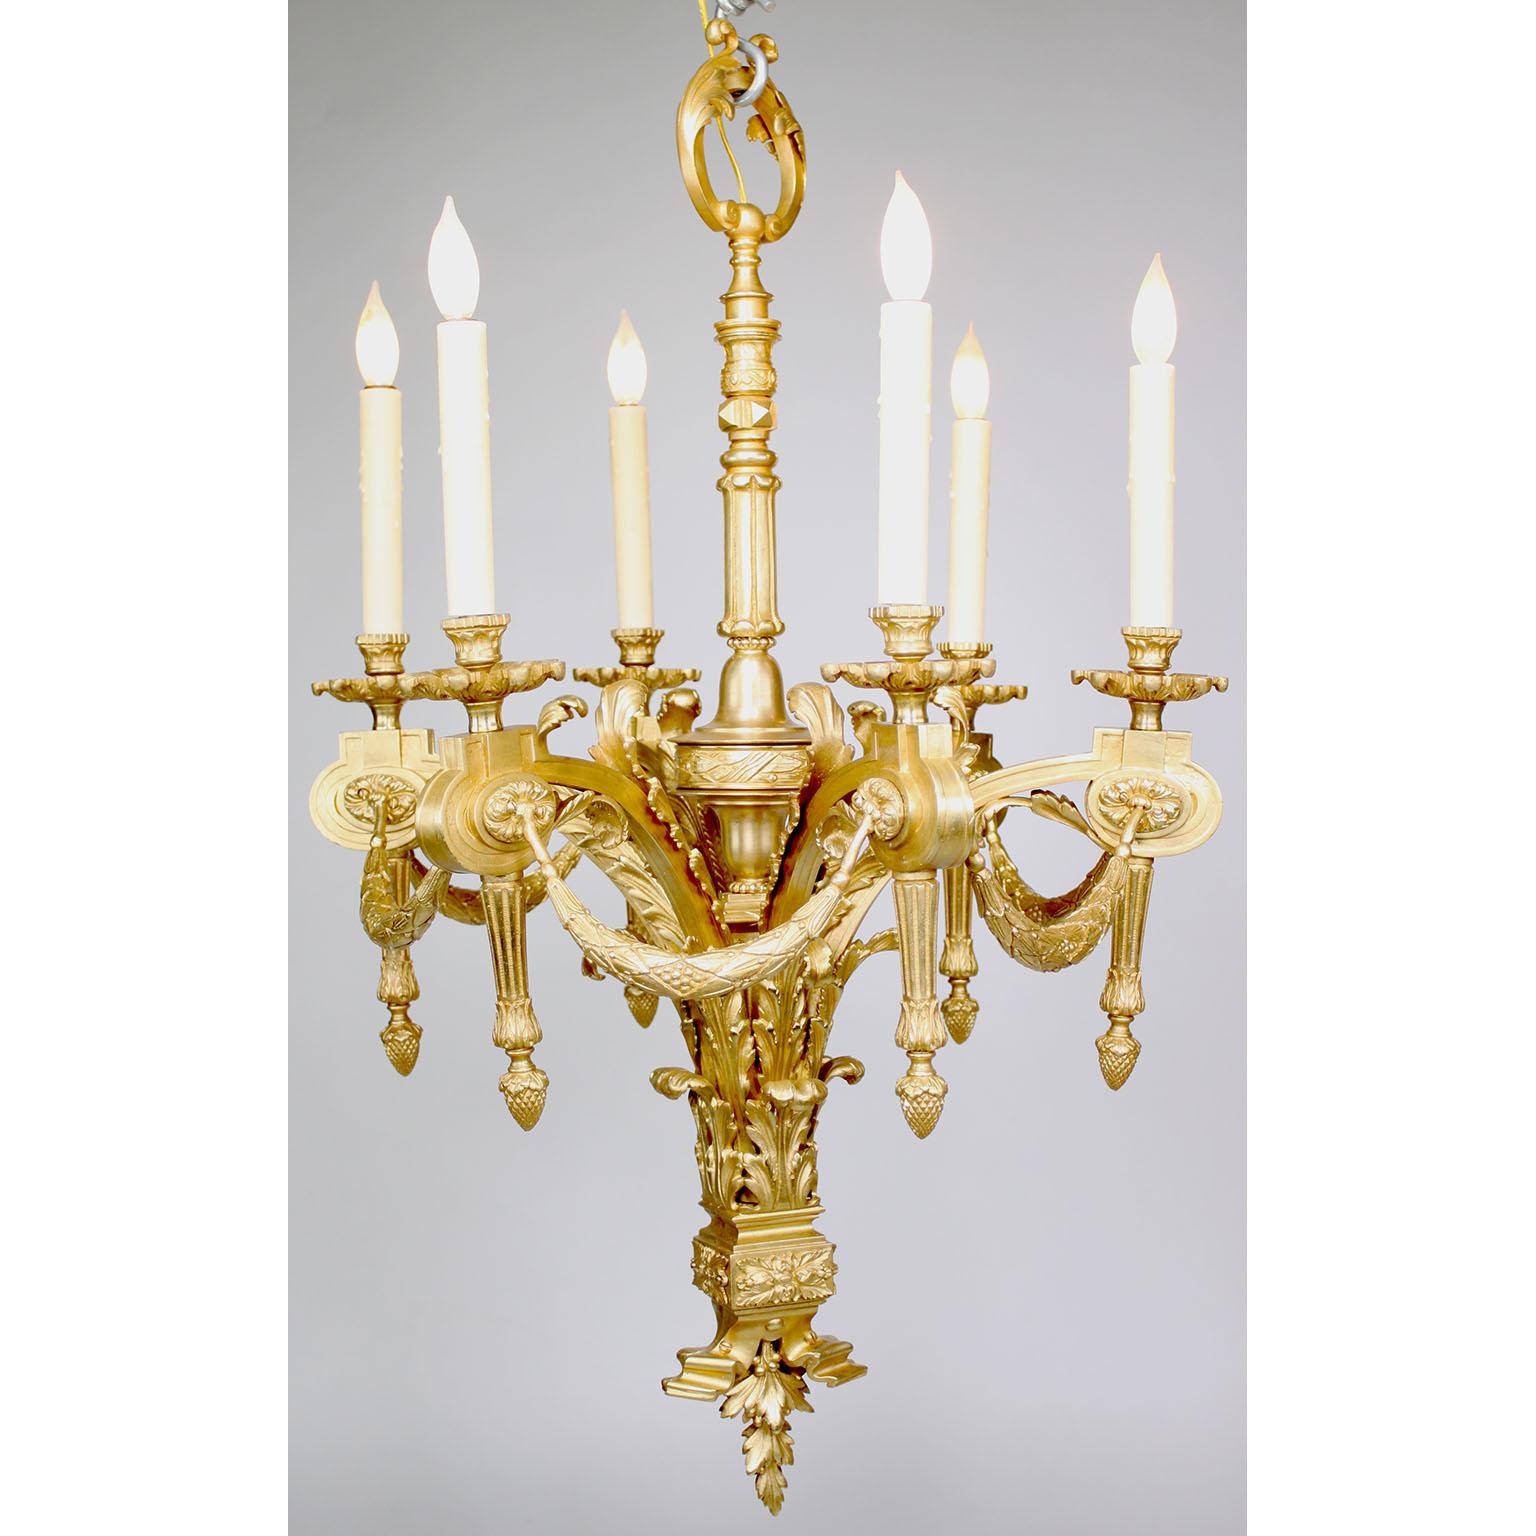 A Charming French Louis XVI style gilt bronze six-light chandelier. Each candle arm conjoined with garlands above a cartouche ending with an acorn. The center stem with a floral loop all above a foliage and acanthus base, circa 1900's,